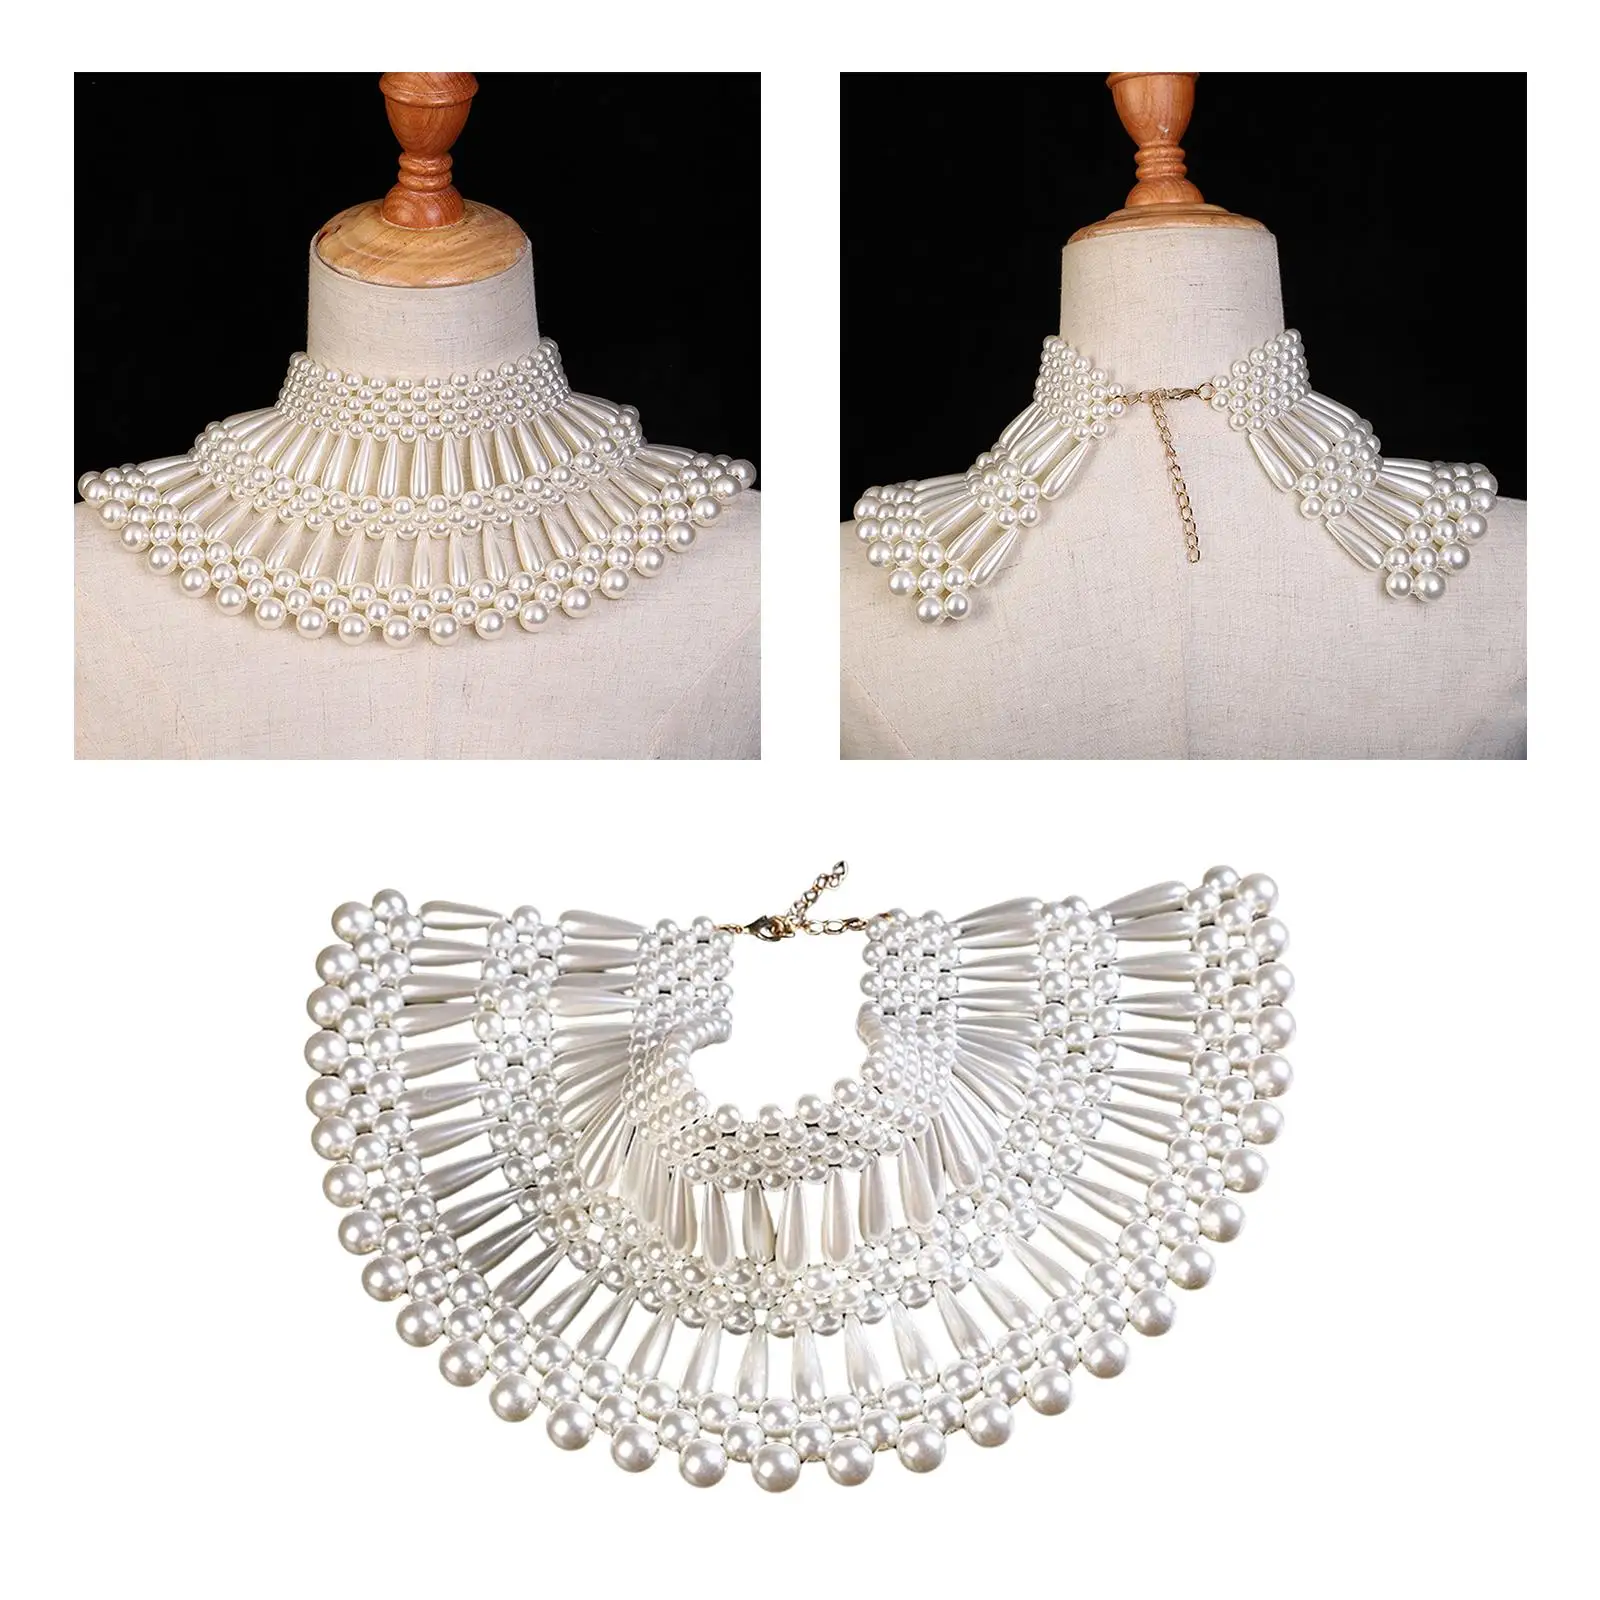  Pearl Necklace Shawl Beaded Bib Choker Necklace Collar Jewelry for Women